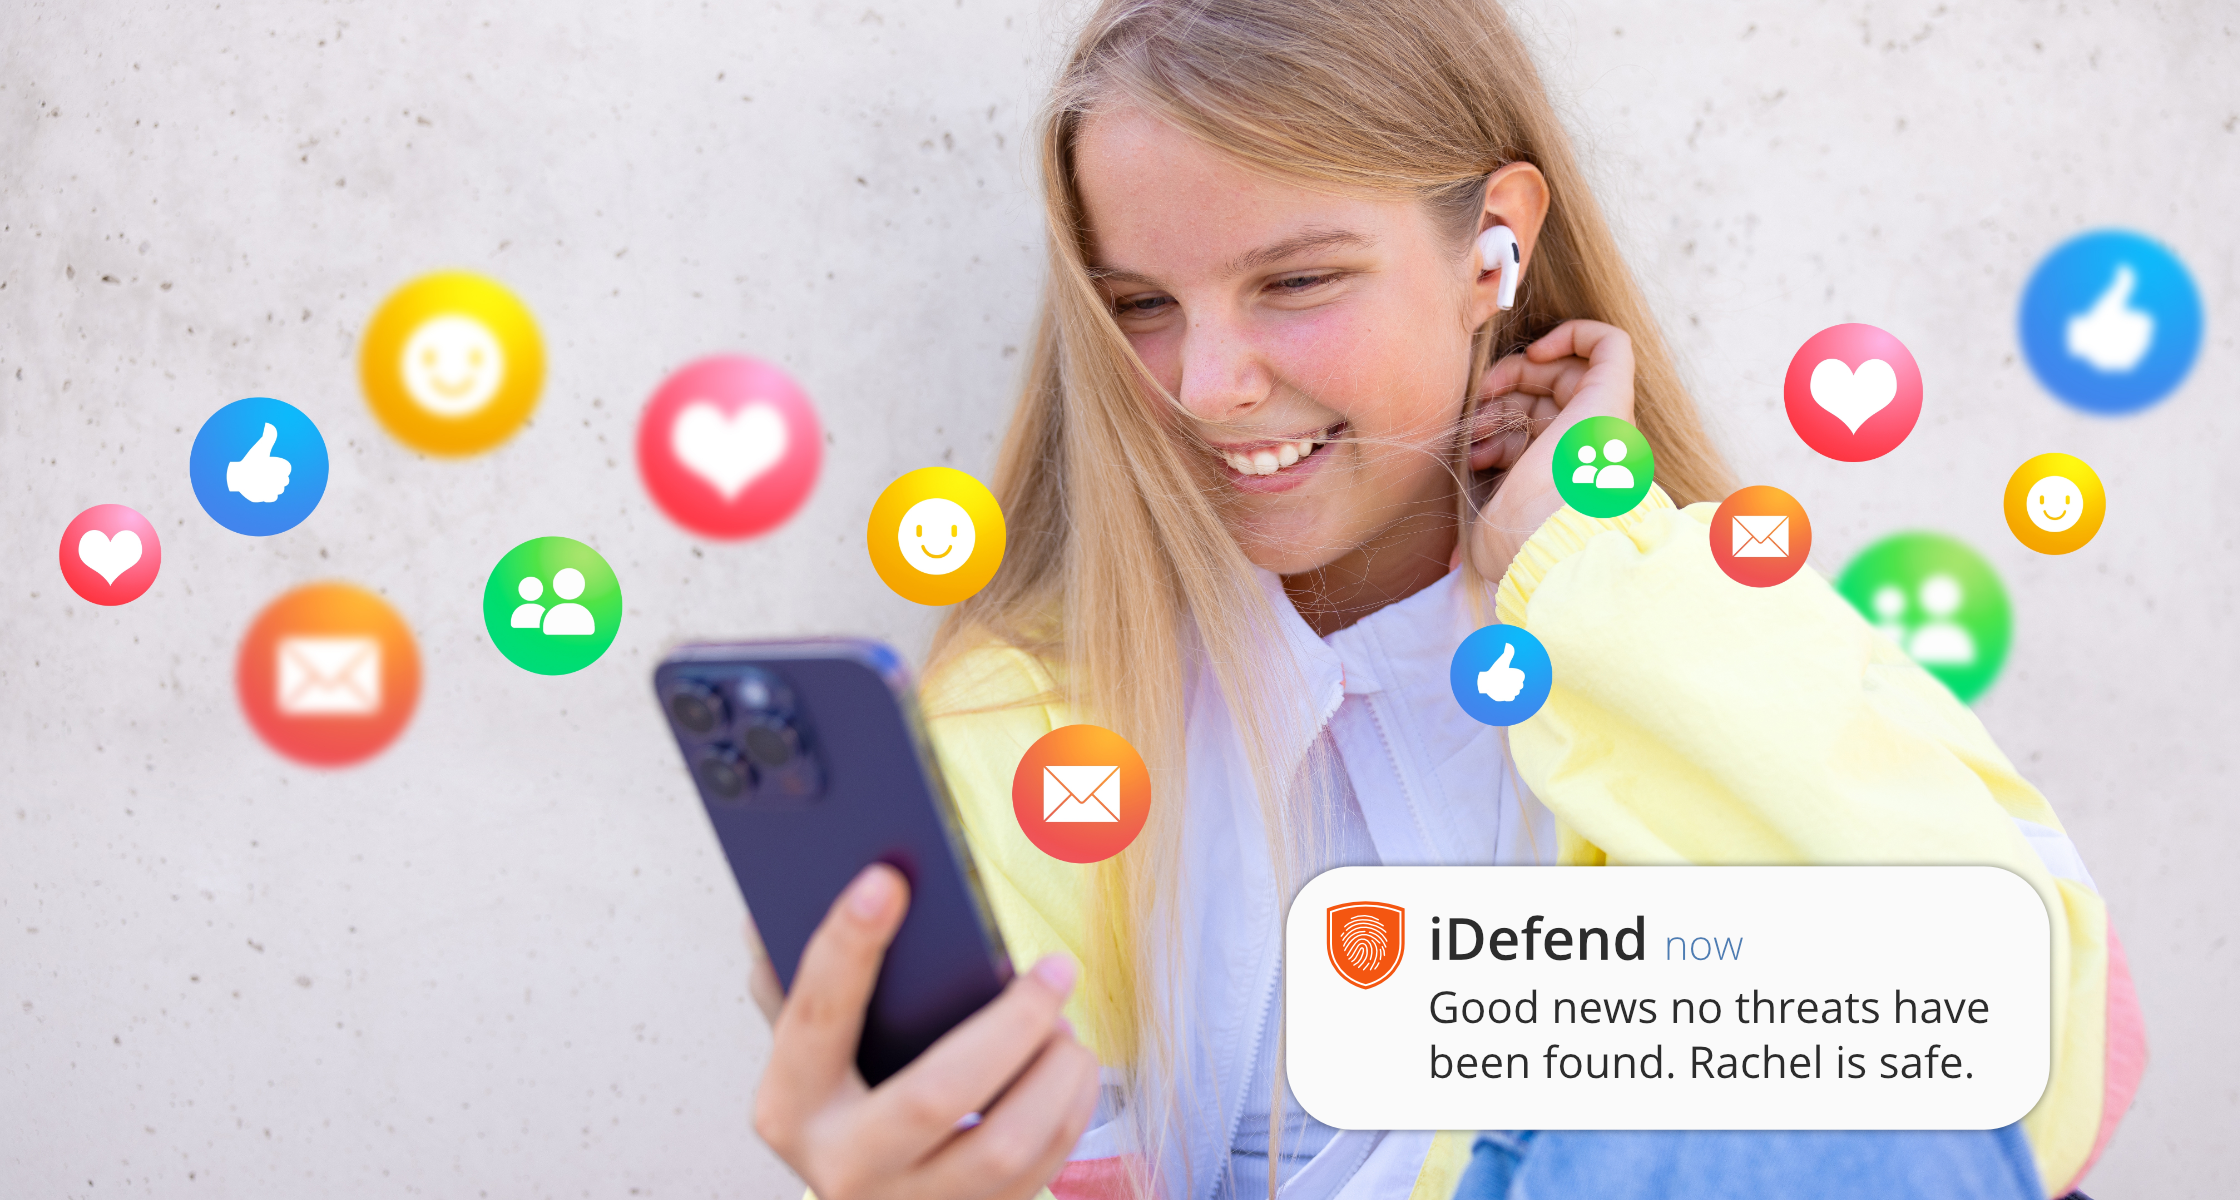 Social Media ProtectionGet notified of social media dangers to protect your family from unwanted threats and privacy risks.